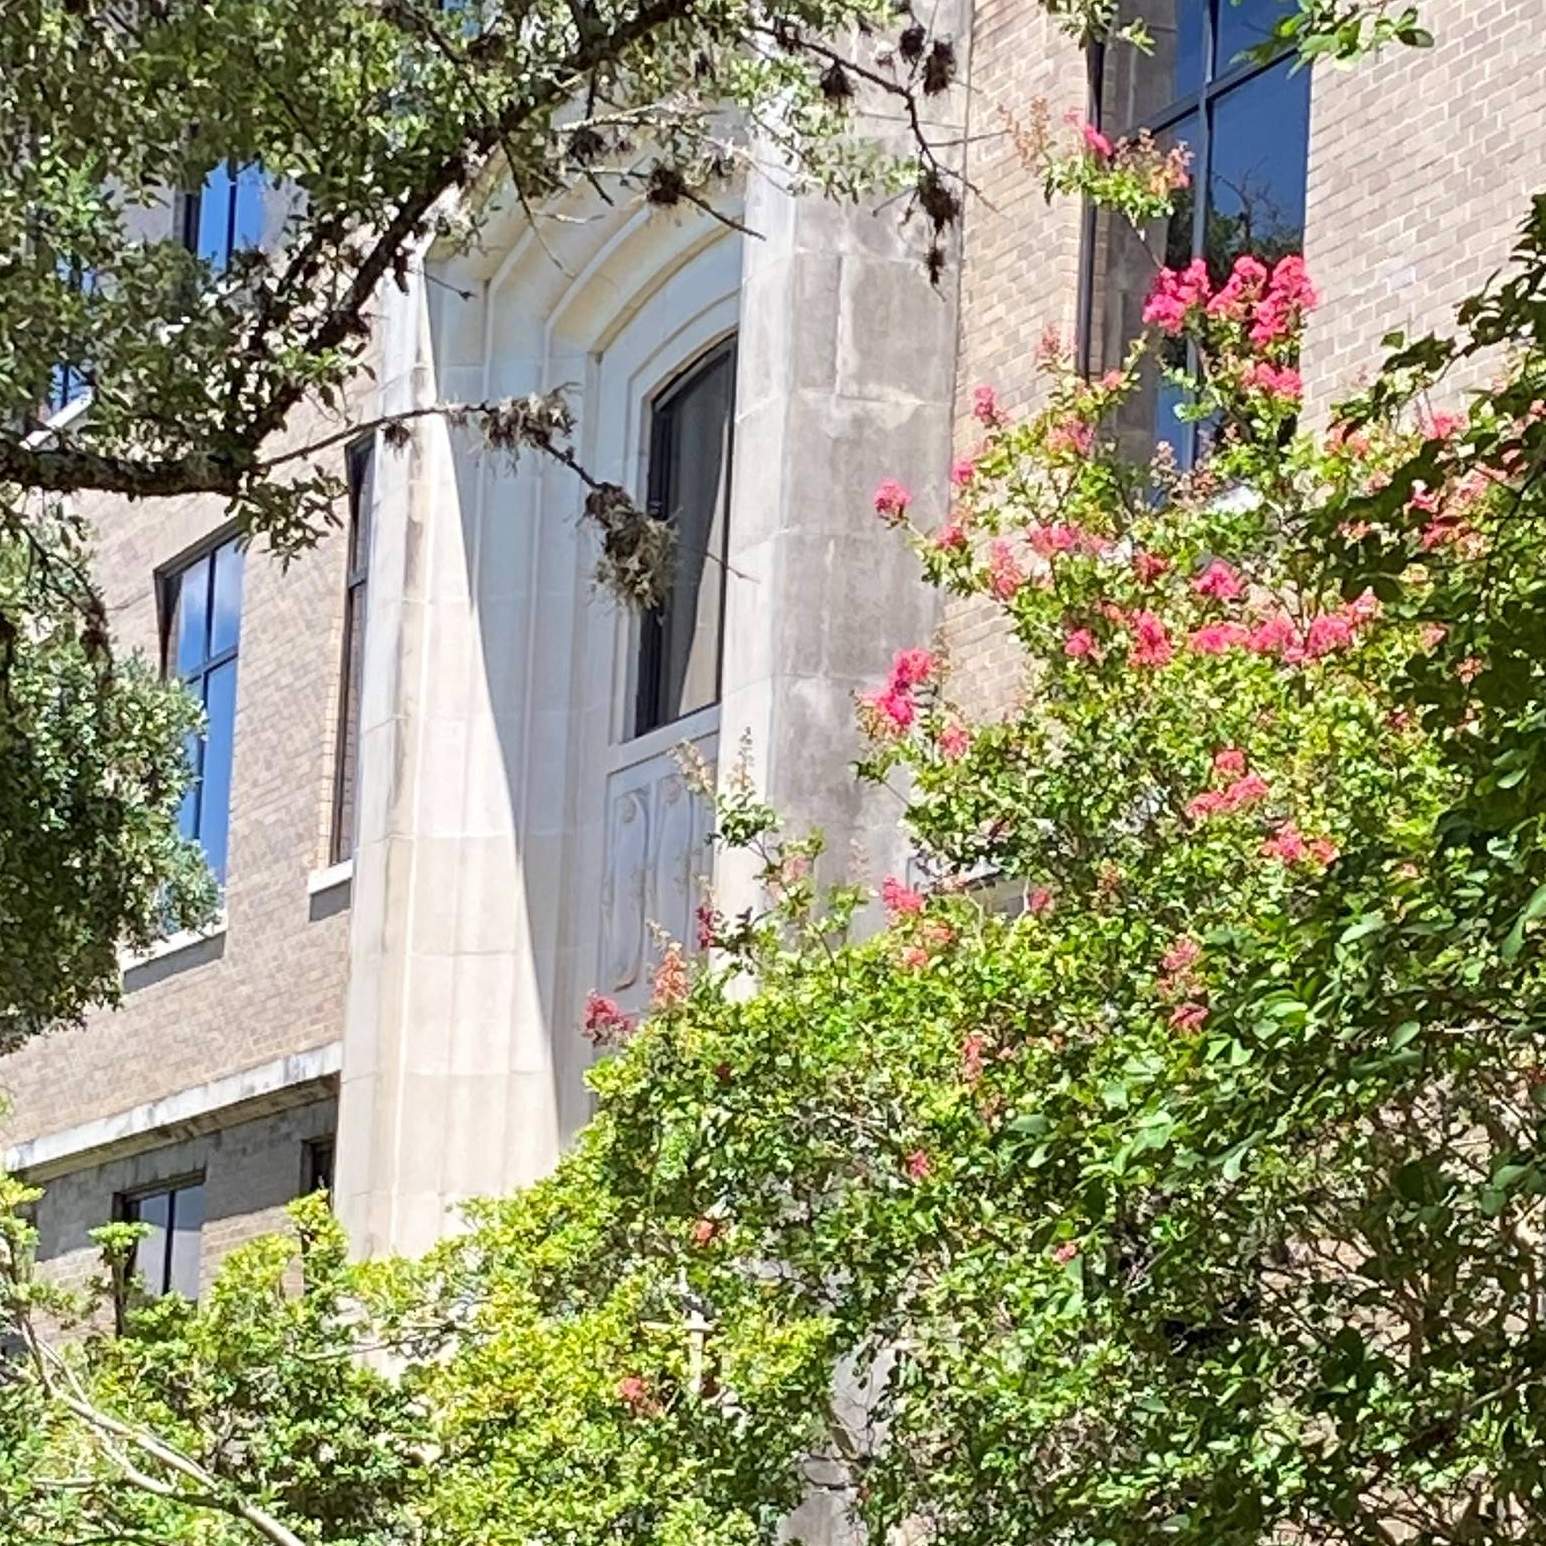 Image of the Comal building